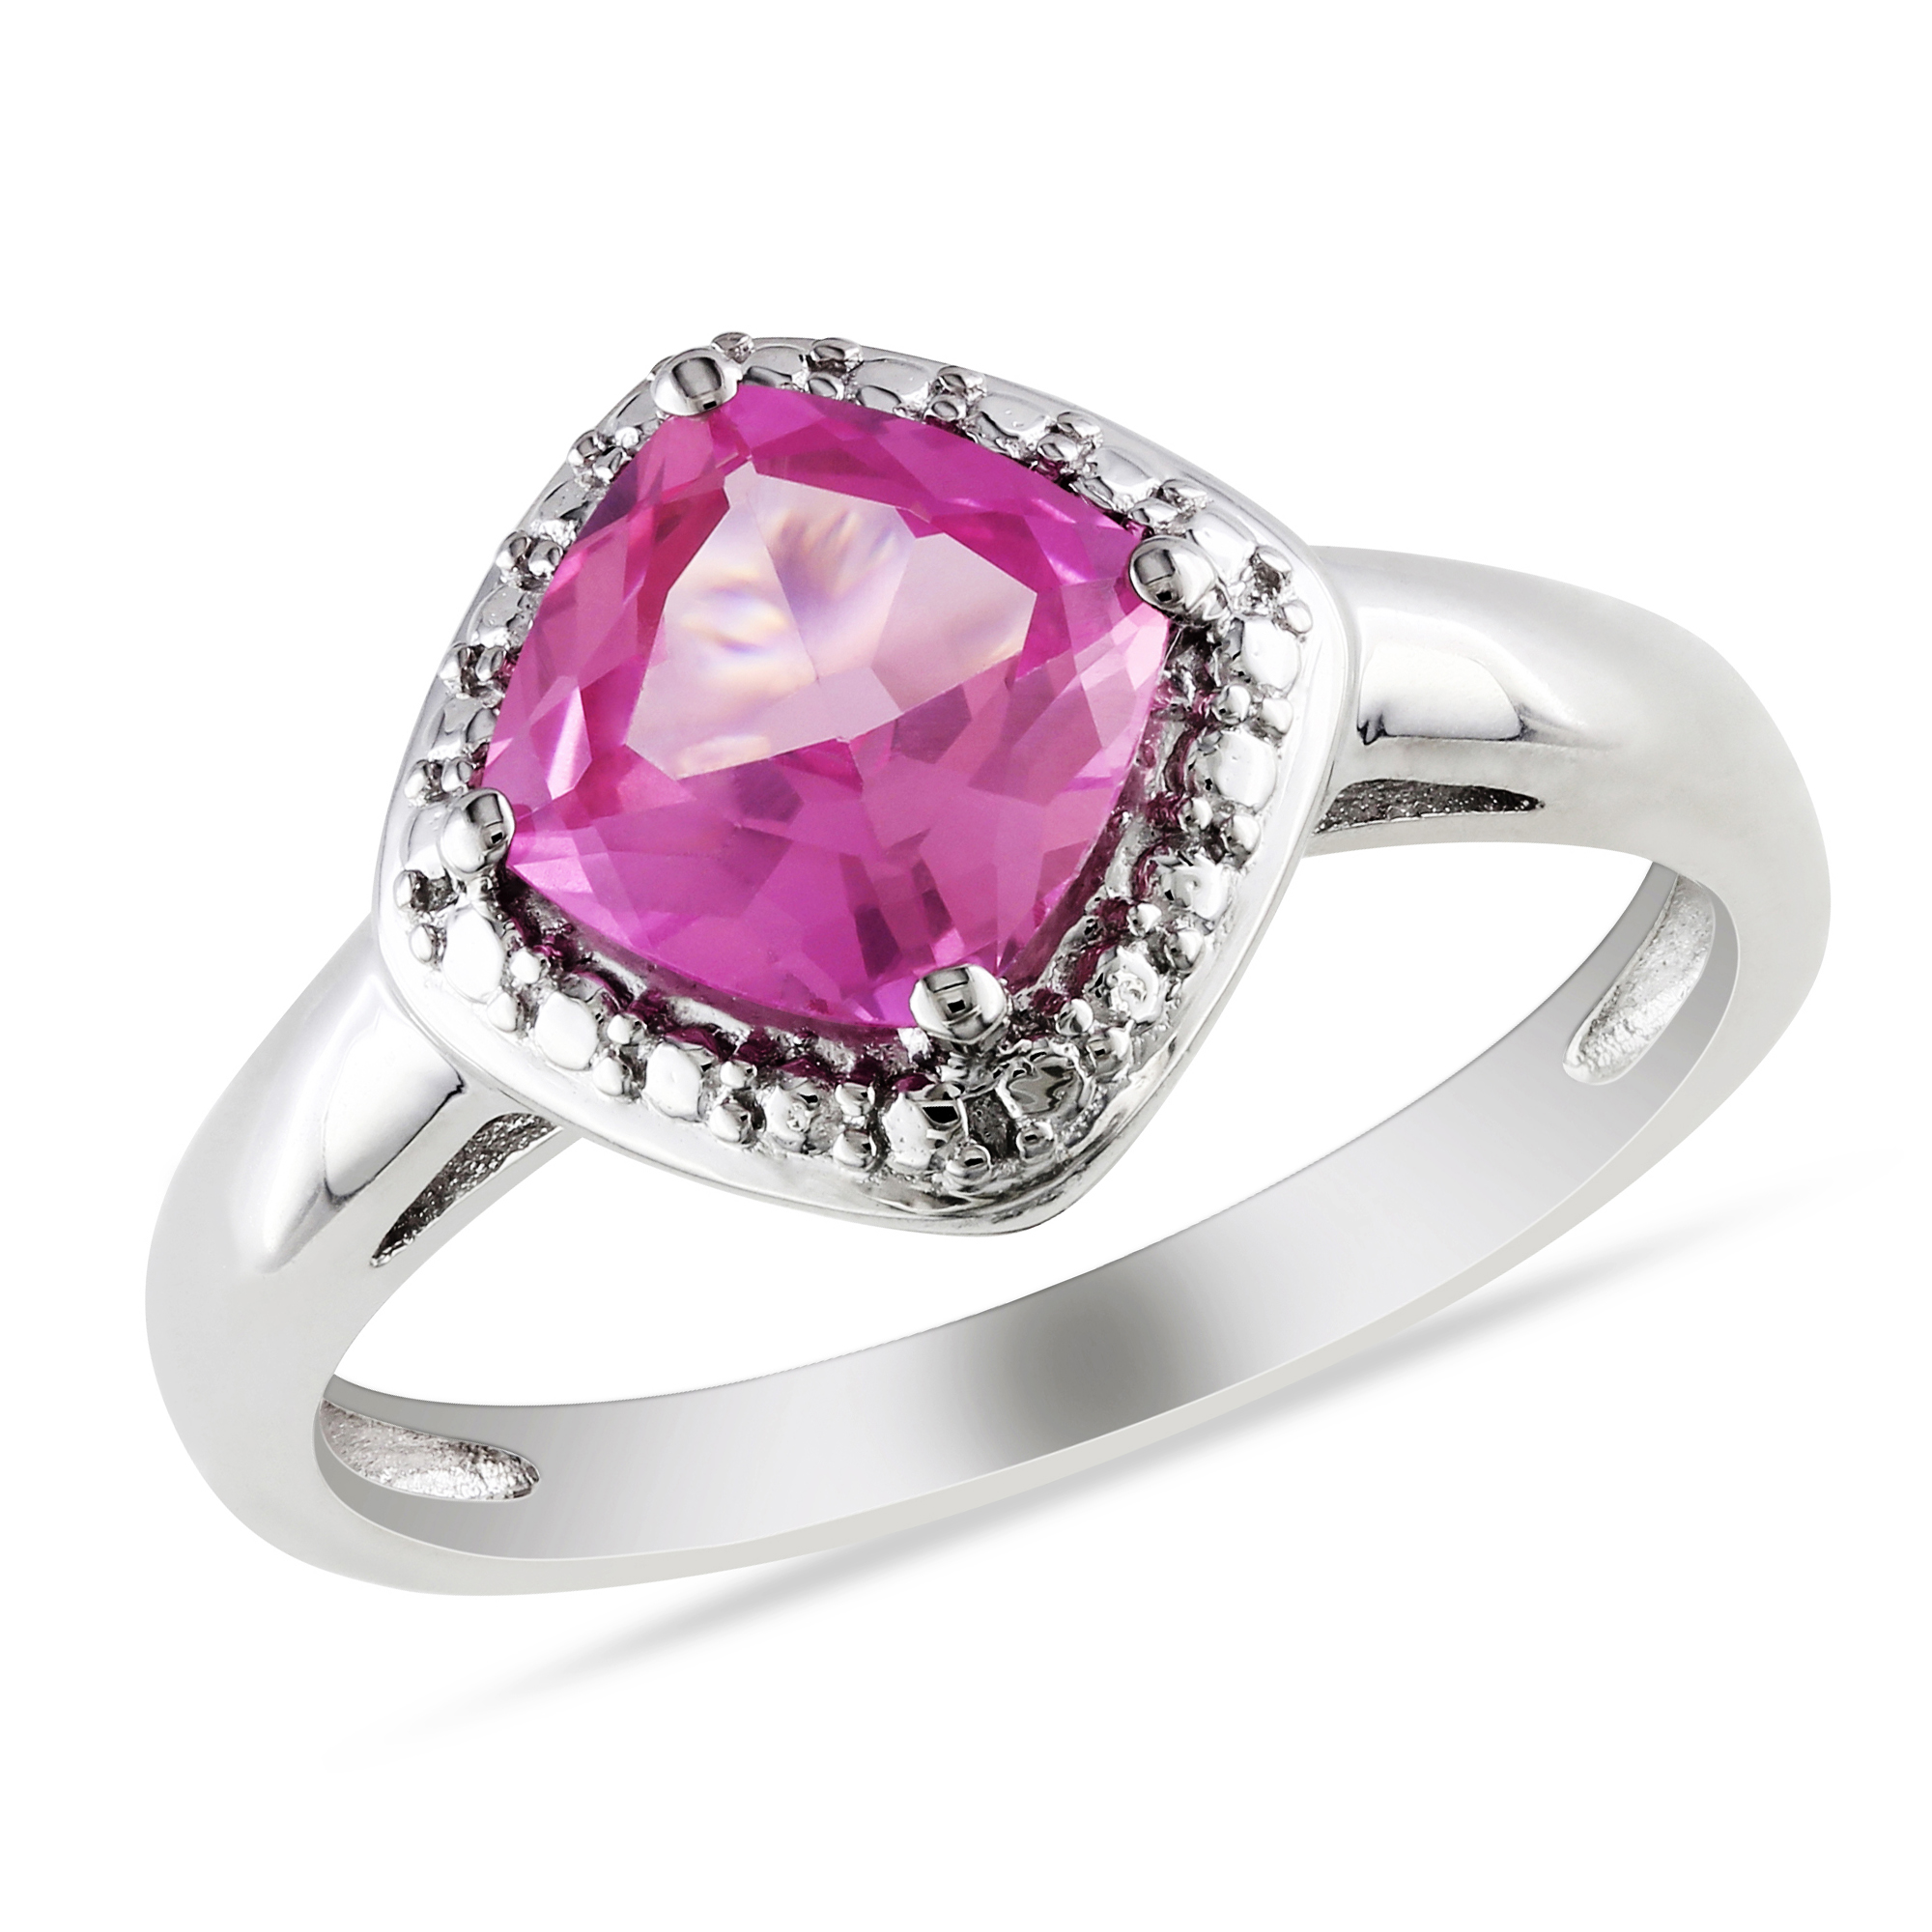 2 Carat T.G.W. Created Pink Sapphire Fashion Ring in Sterling Silver